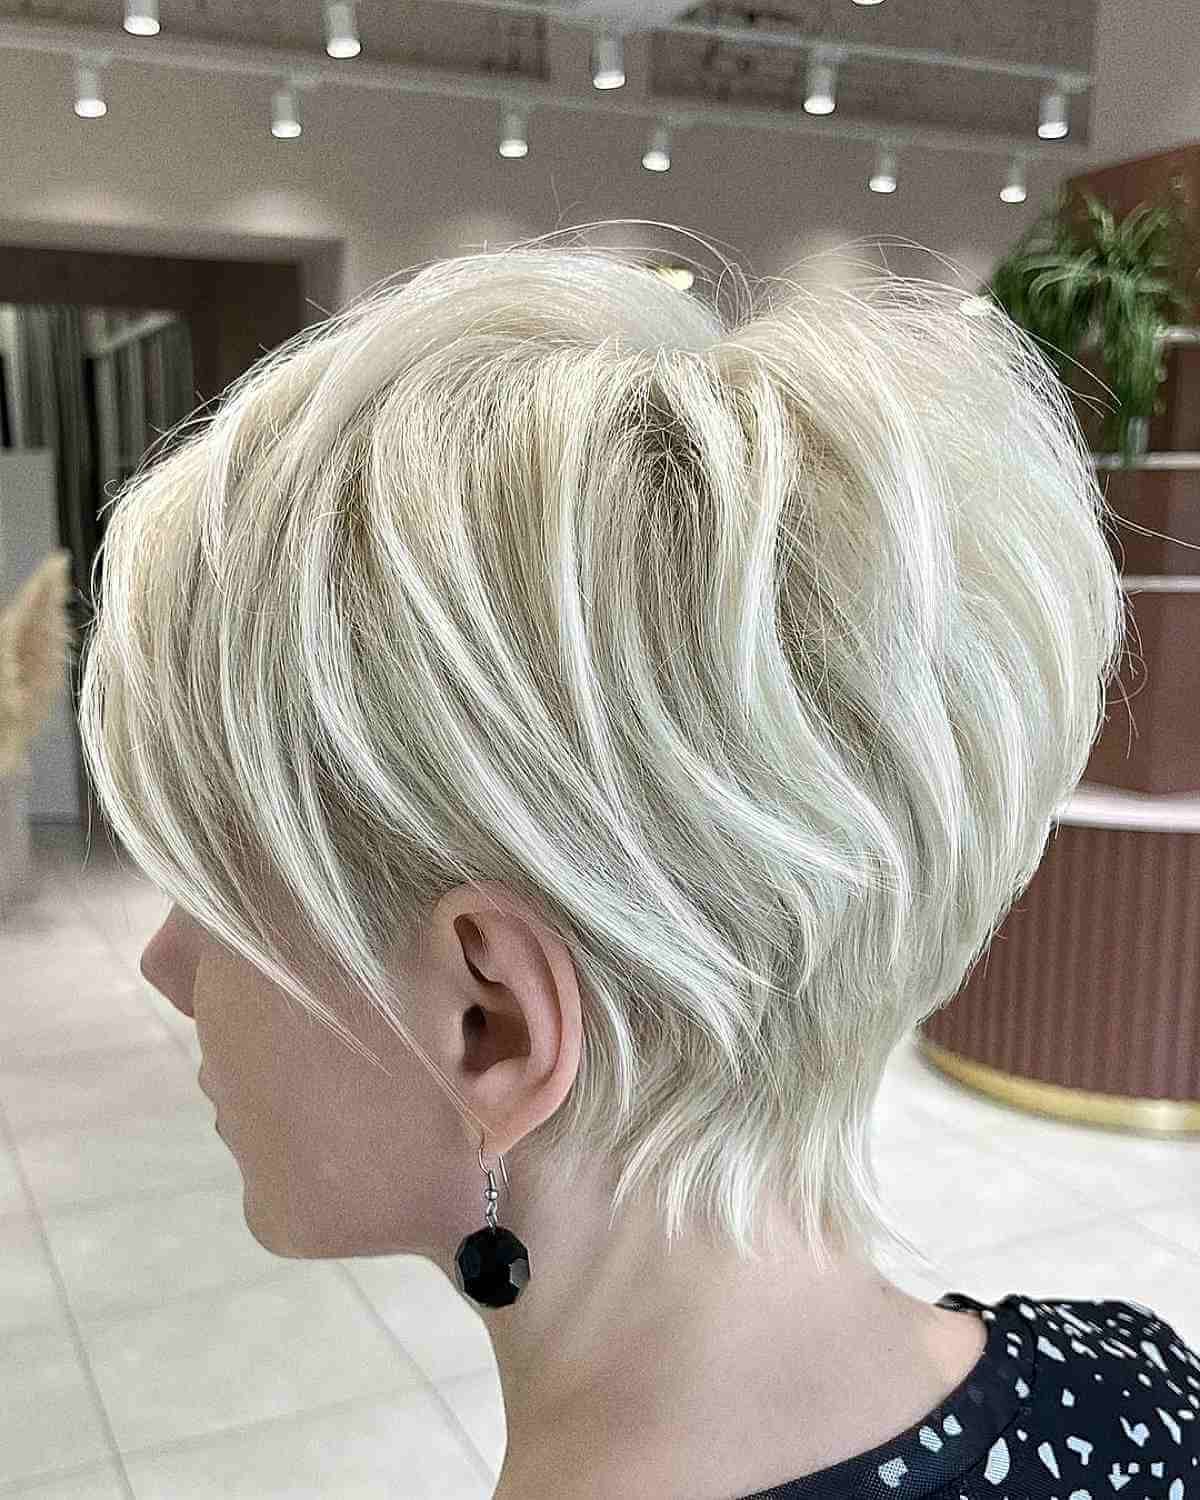 The 34 Cutest Pixie Bob Haircut Ideas Ever Inside Layered Messy Pixie Bob Hairstyles (View 6 of 20)